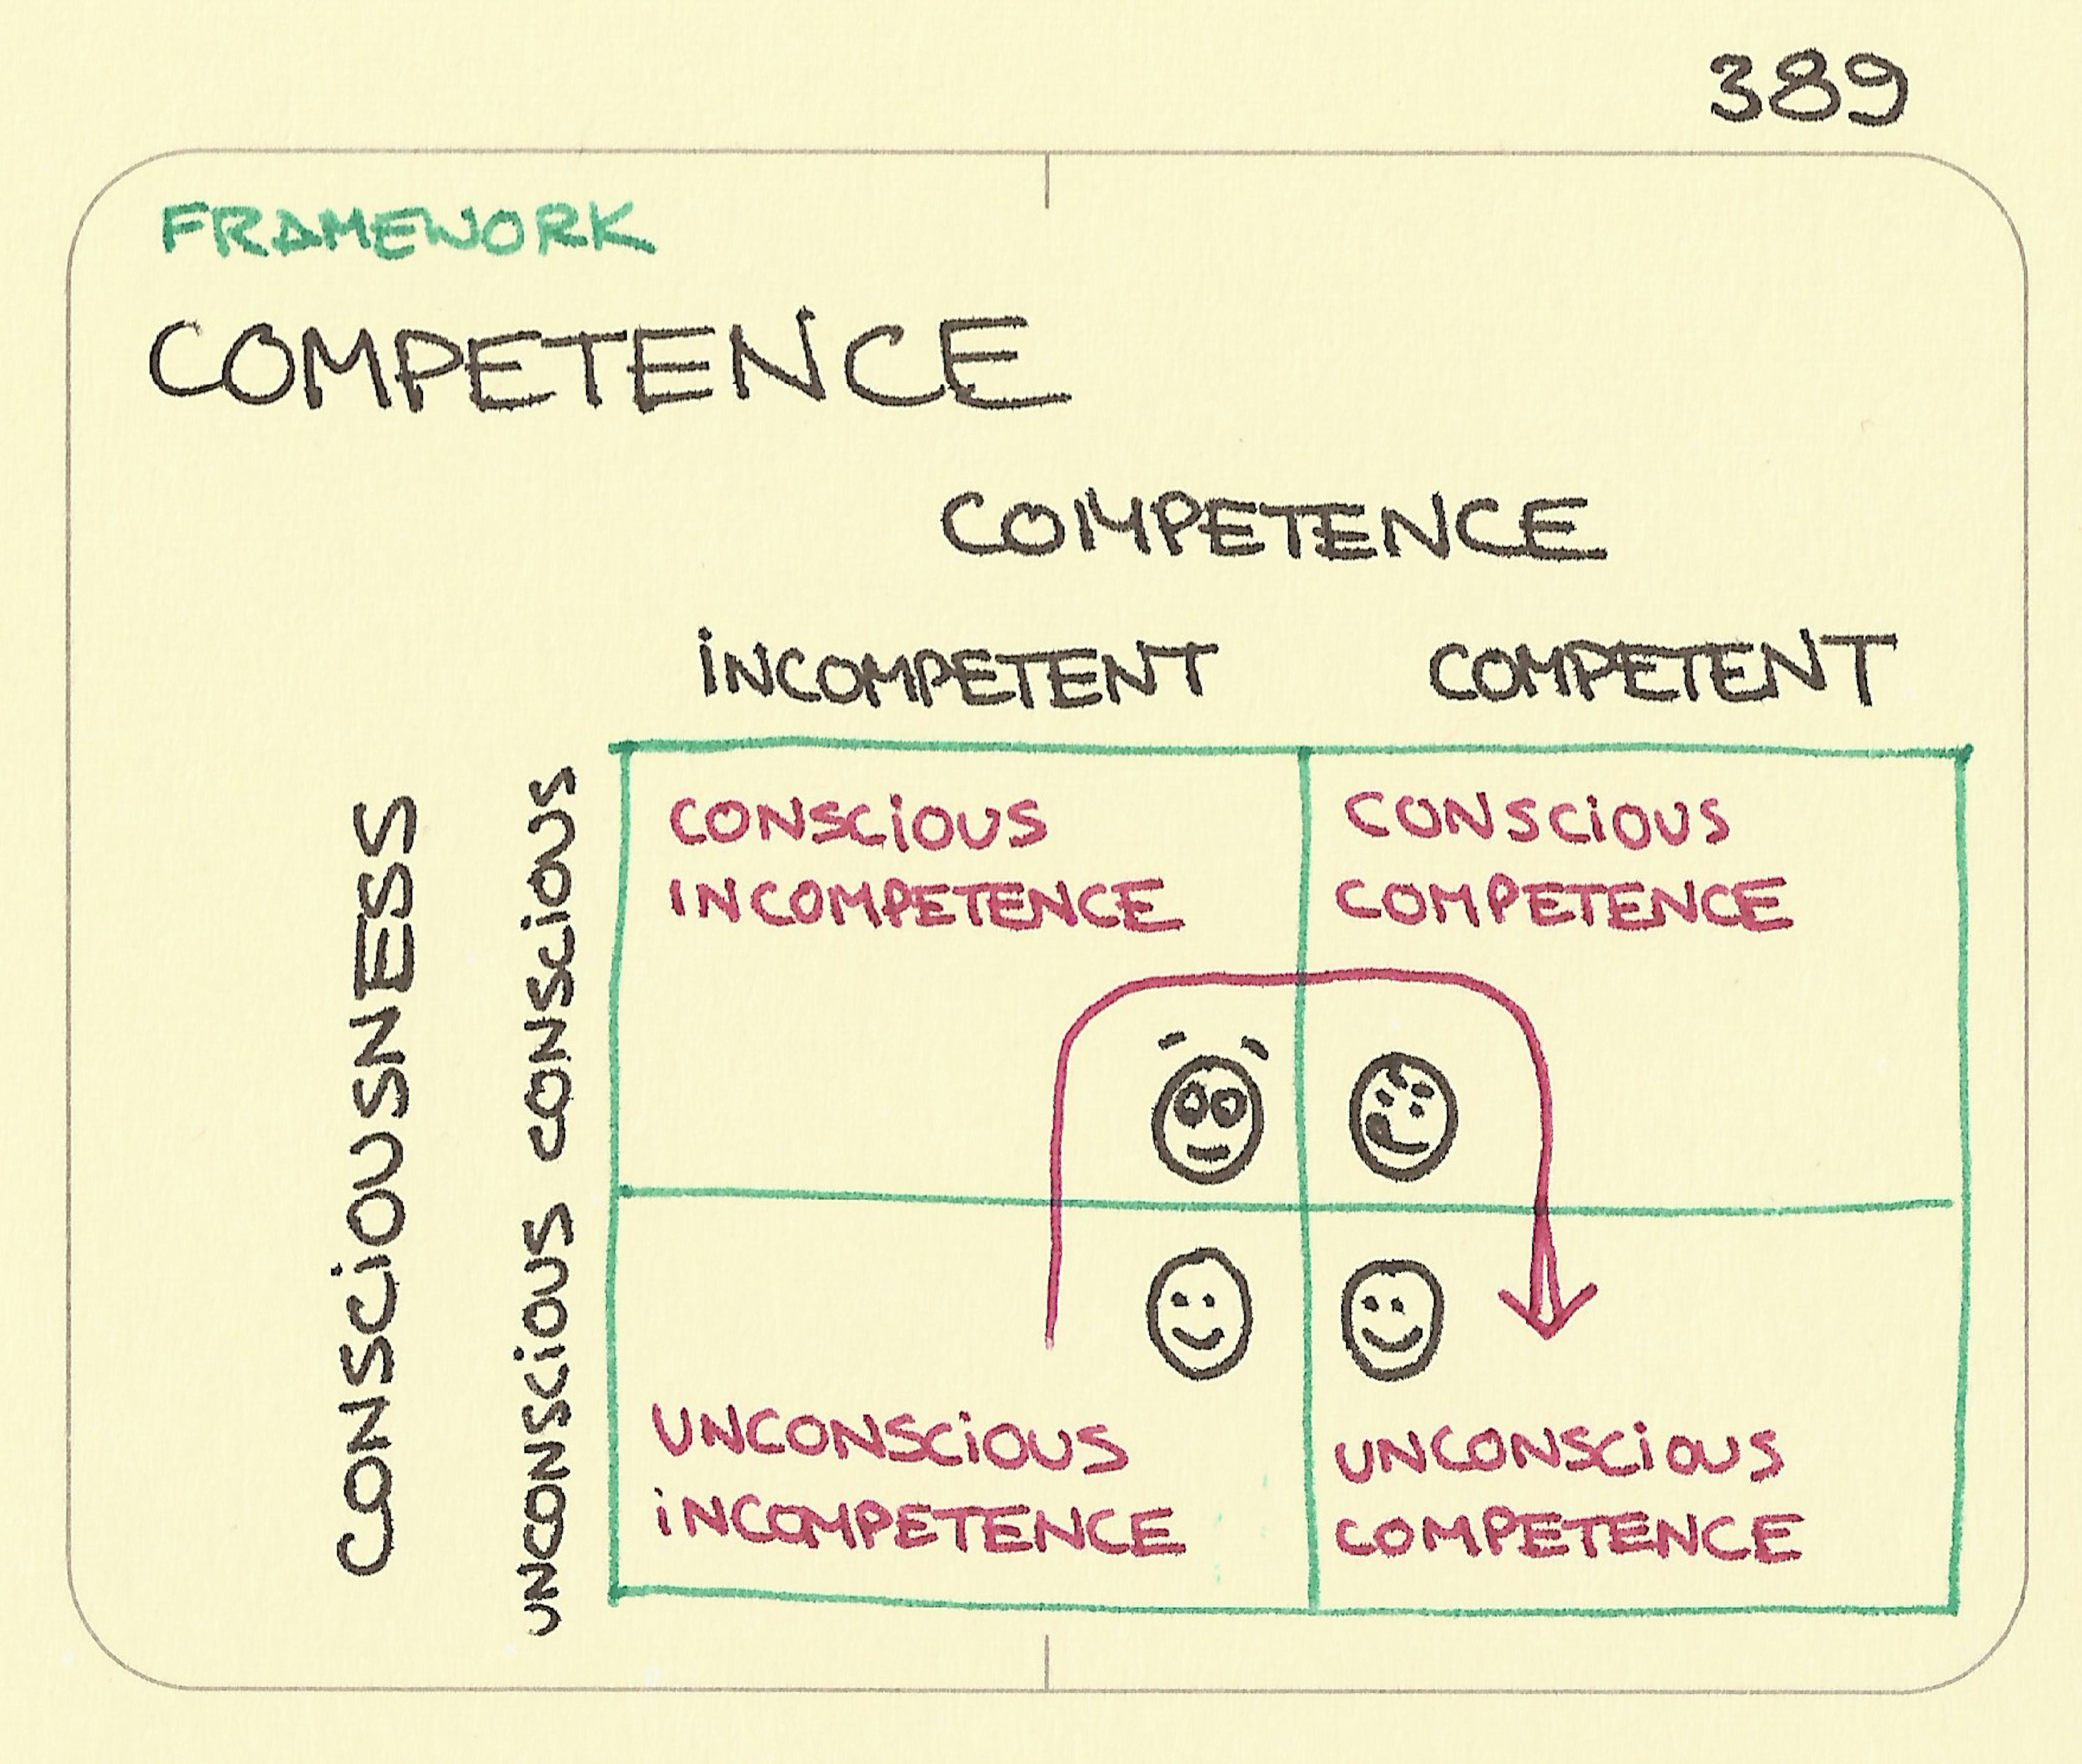 A 2 x 2 grid for competence and consciousness showing the progression between them